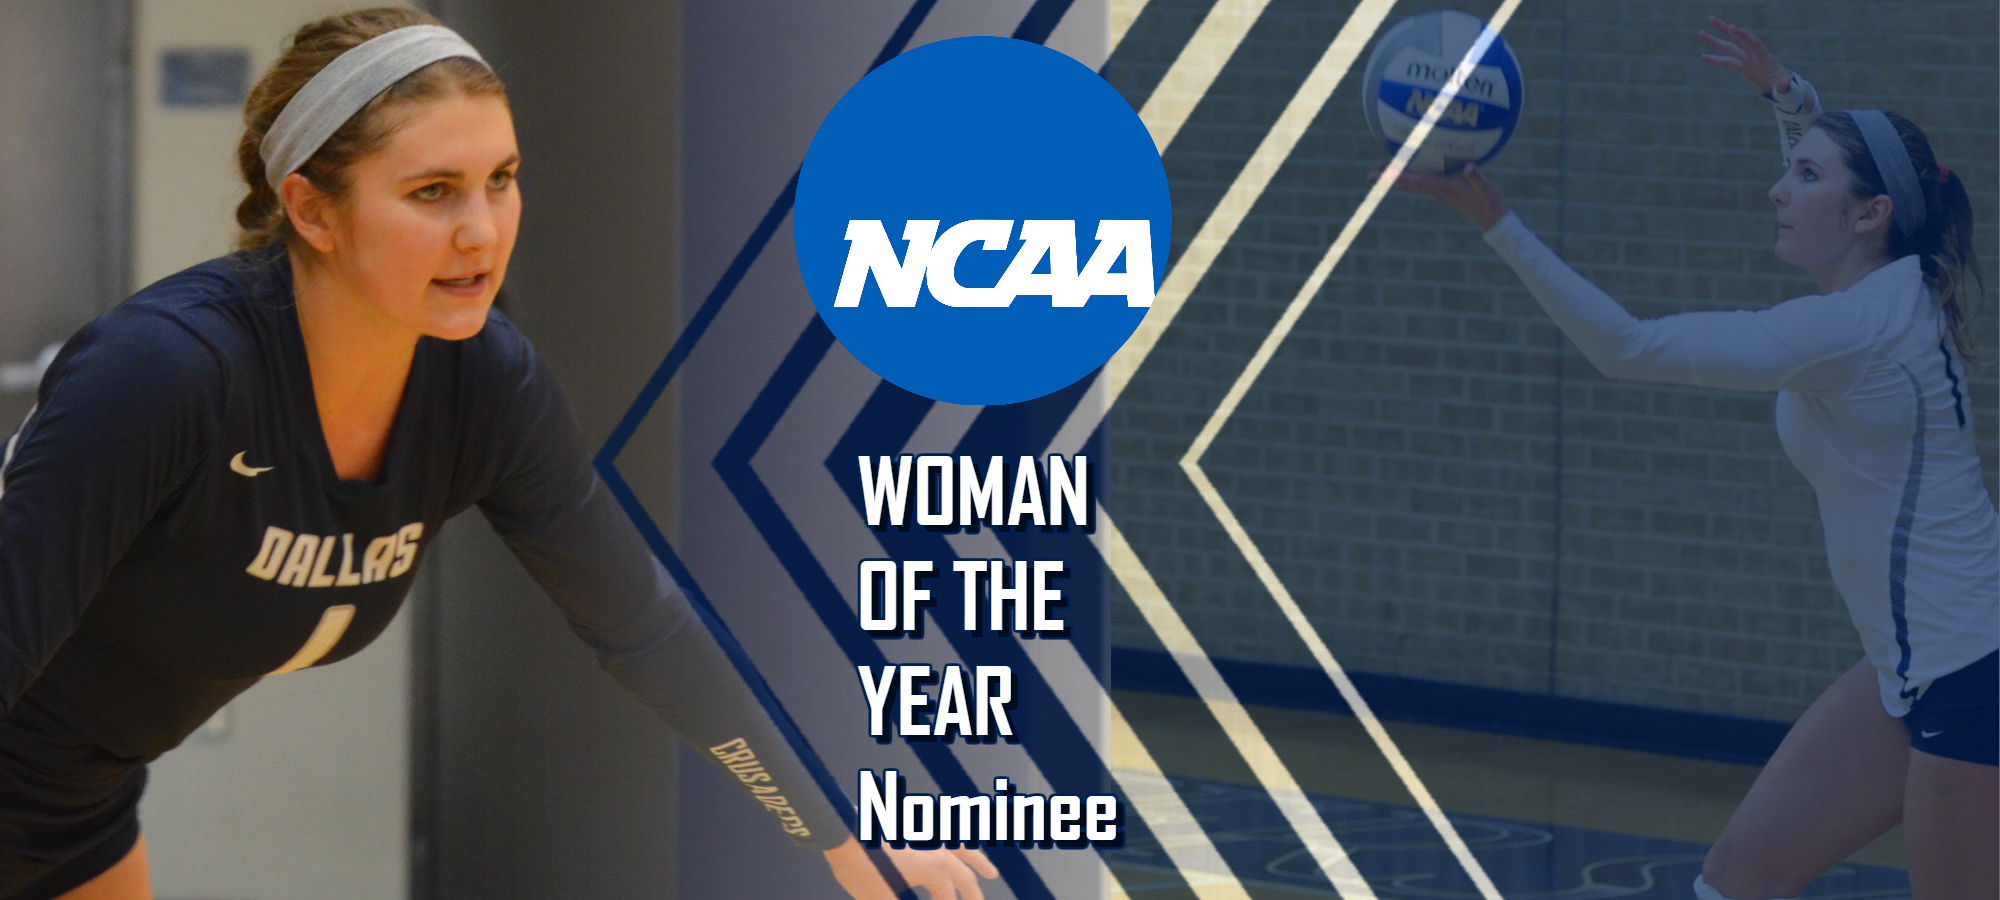 Koster nominated for NCAA Woman of the Year